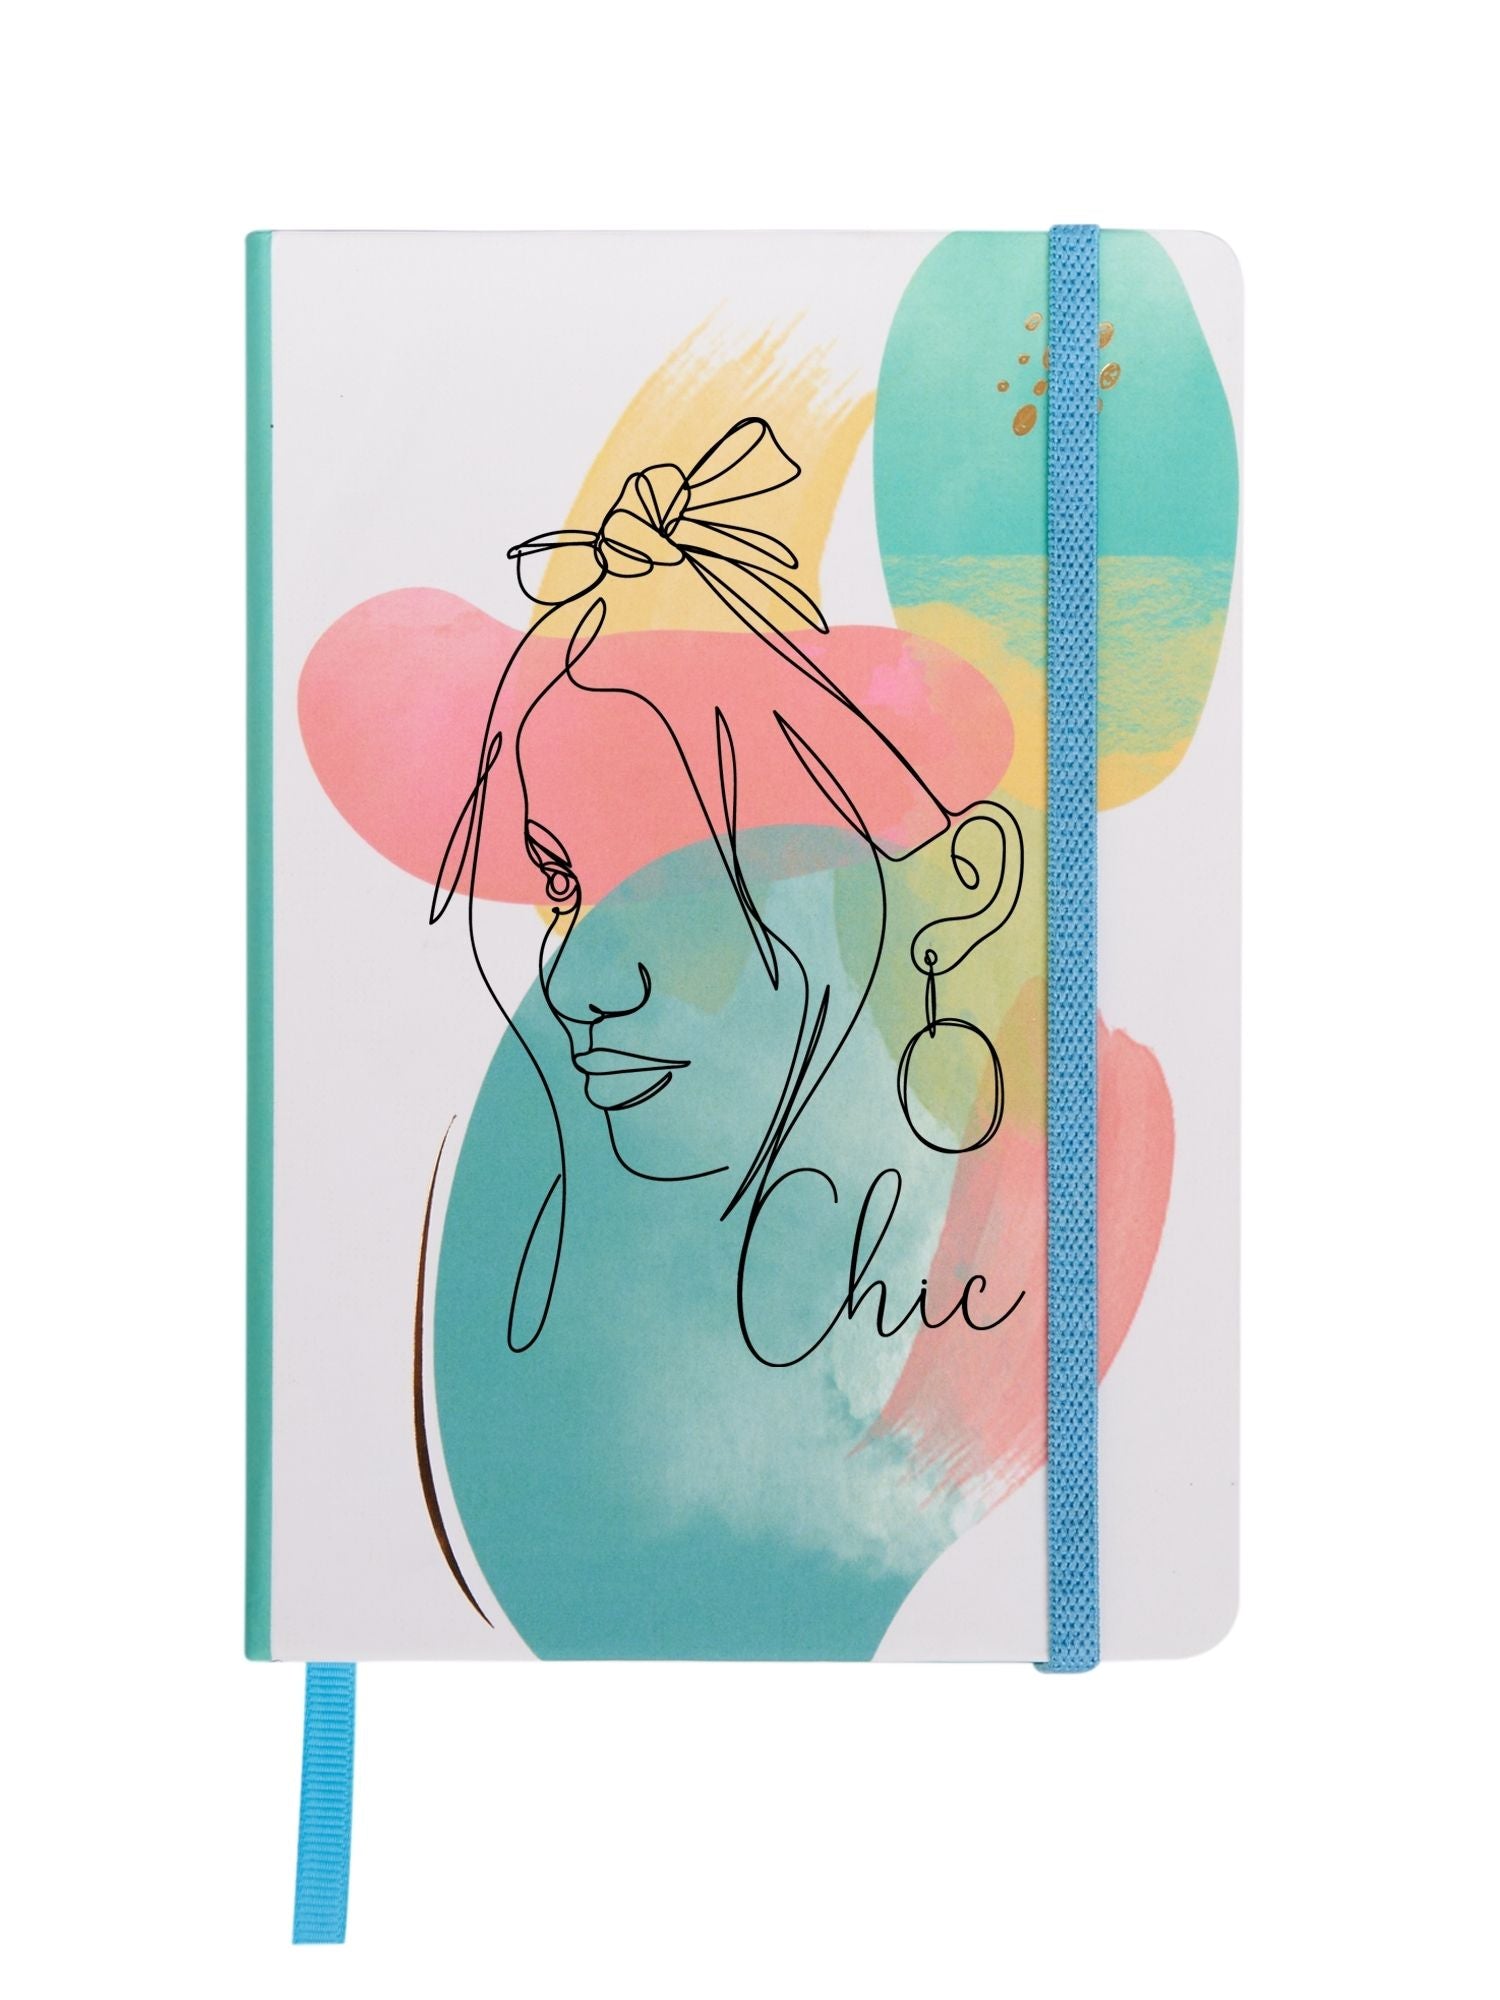 DOODLE Expressions Hardbound B6 Diary Notebook - CHIC